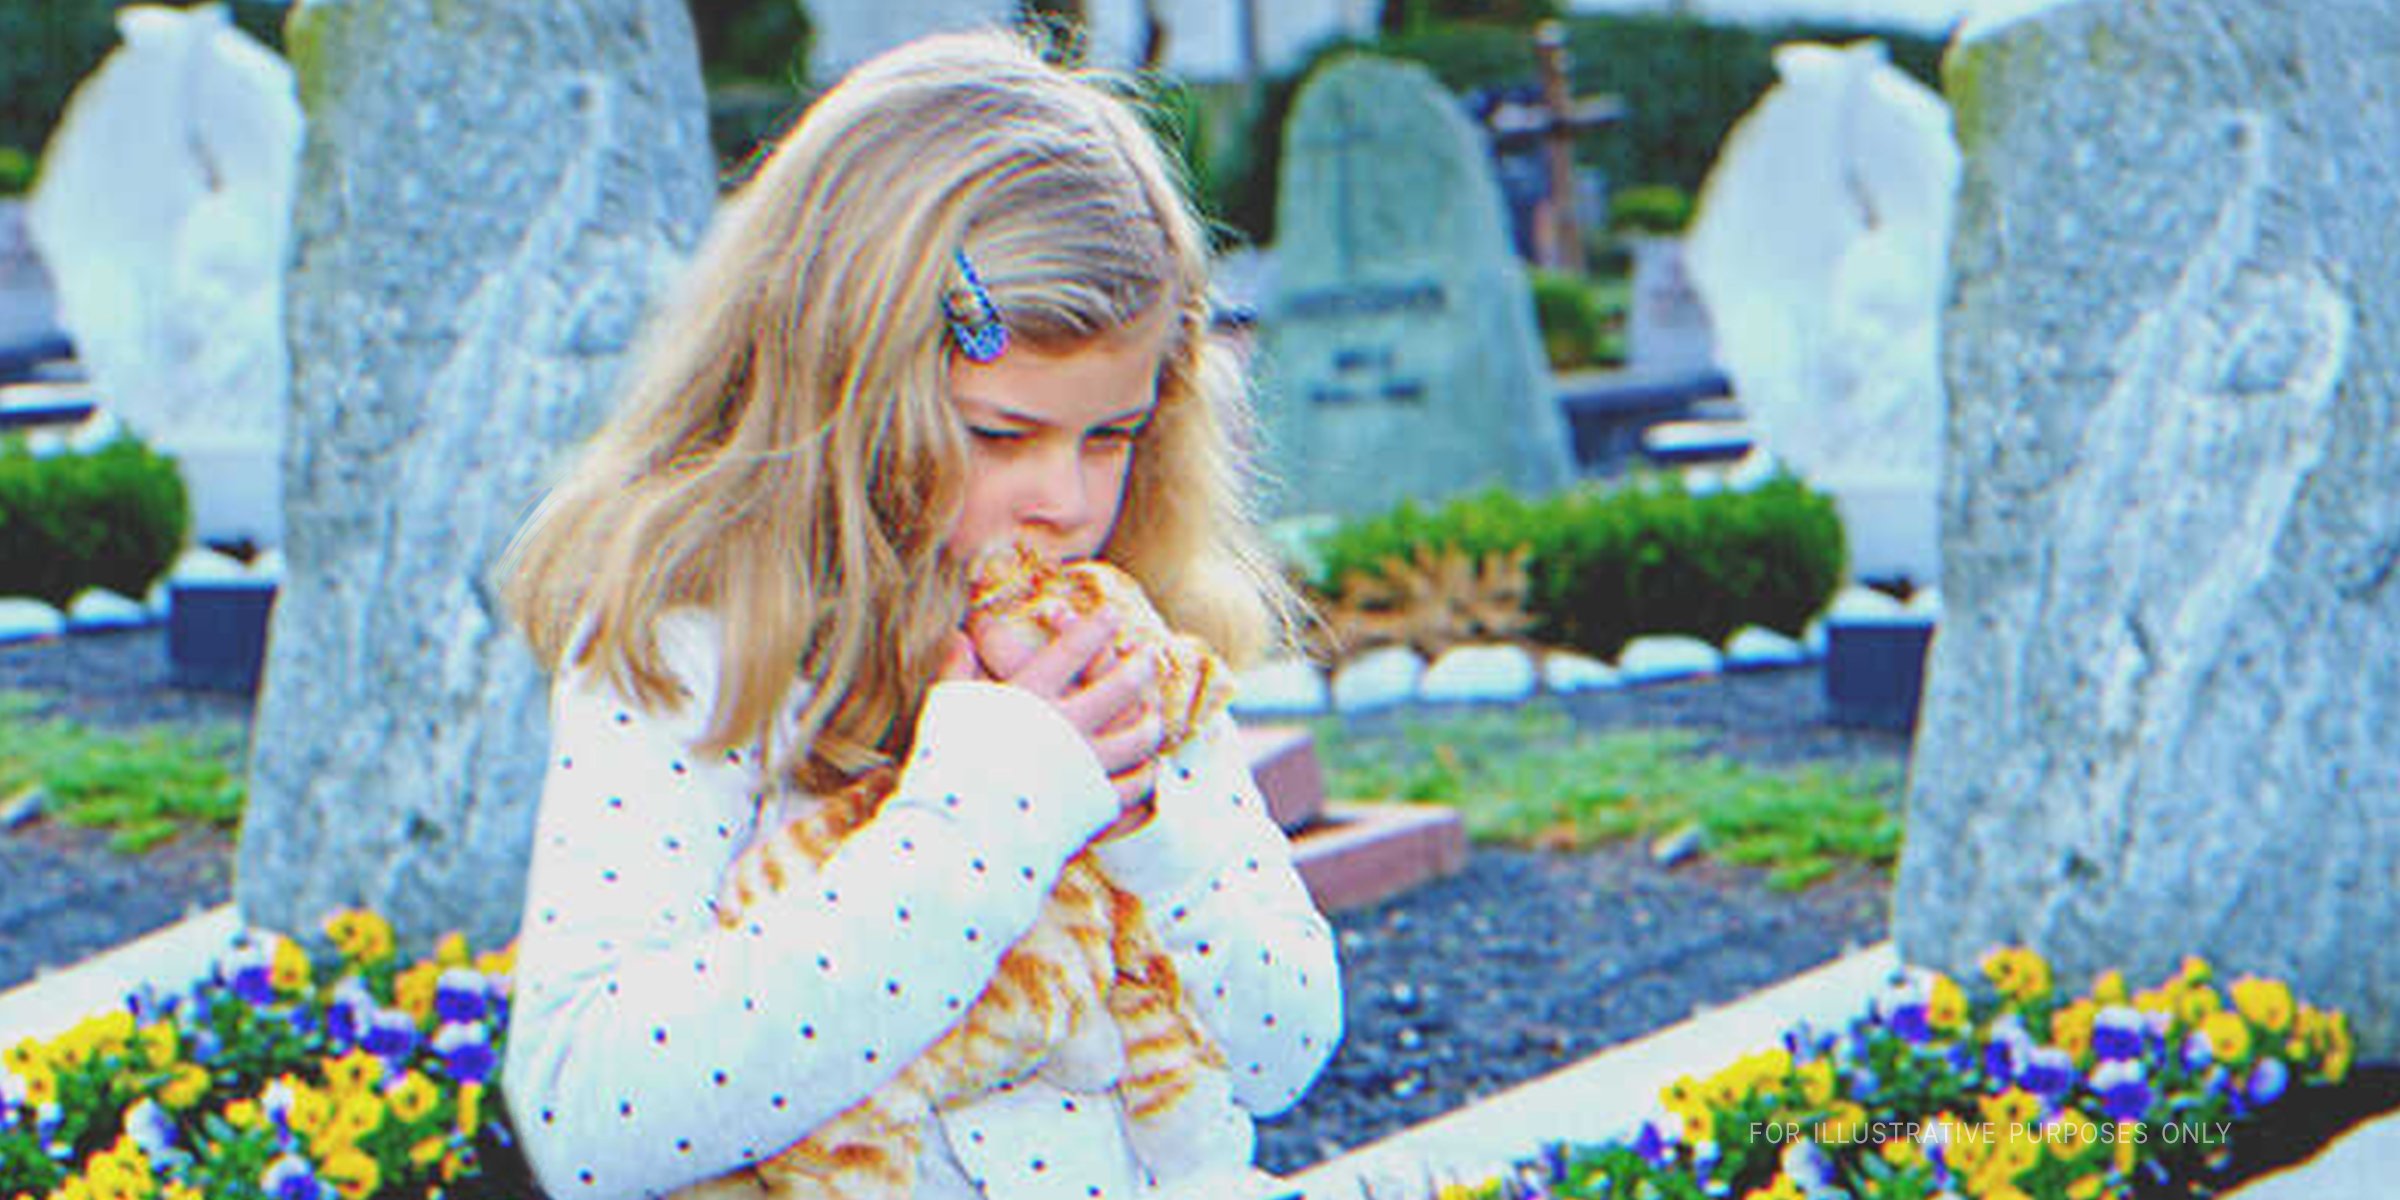 Young girl at a cemetary holding a soft toy | Source: Shutterstock